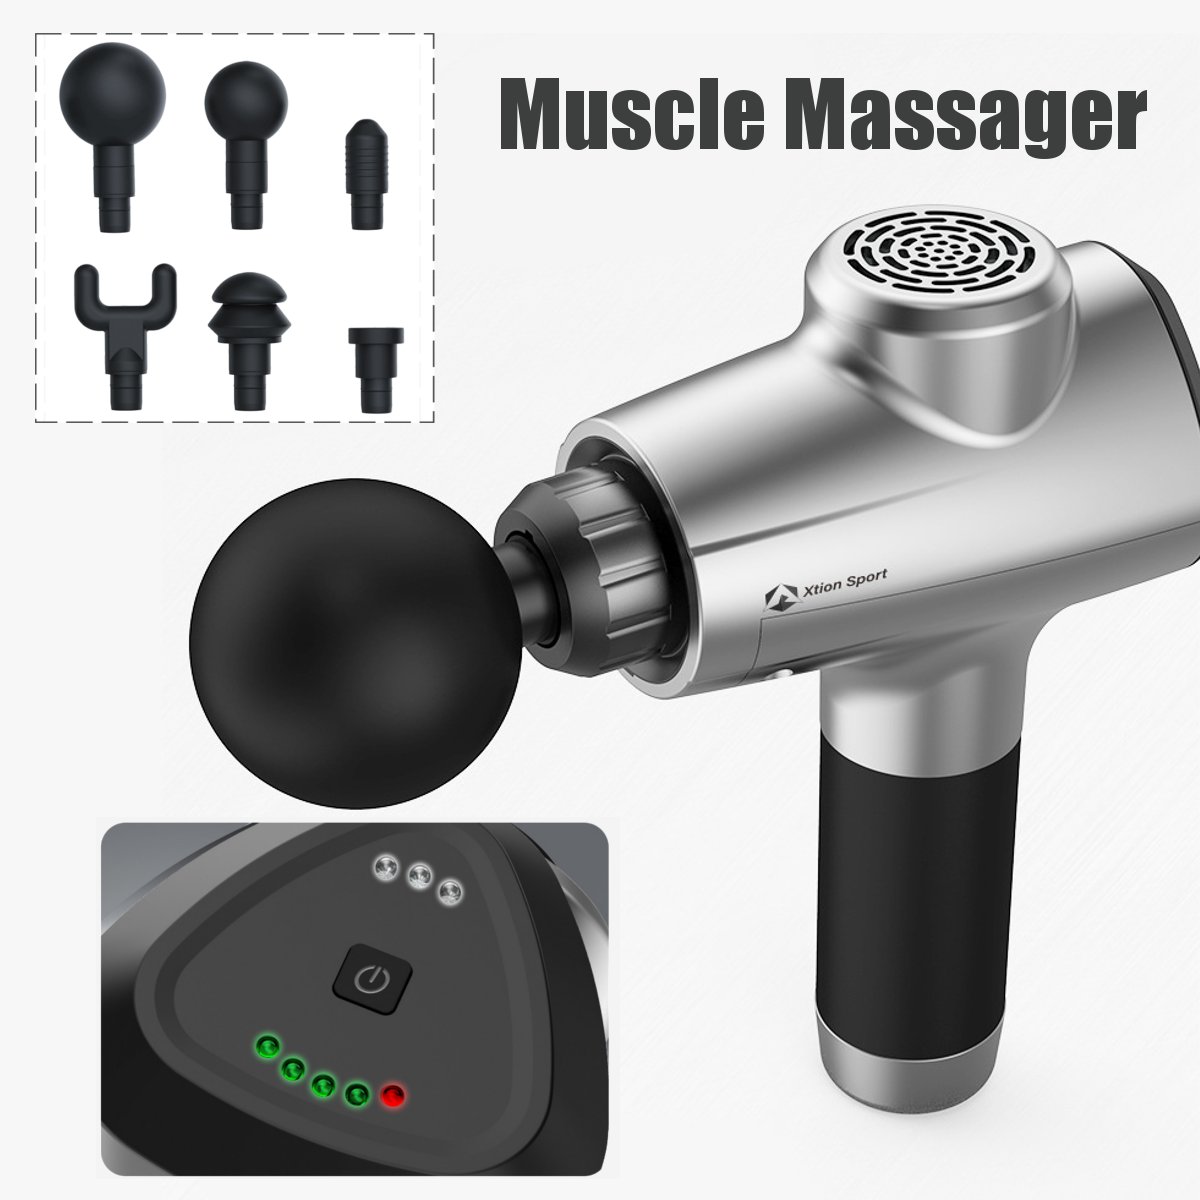 1500mAh-3-Speed-Massage-High-Frequency-Deep-Percussion-Massager-Muscle-Vibrating-Relaxing-Electric-M-1579699-1